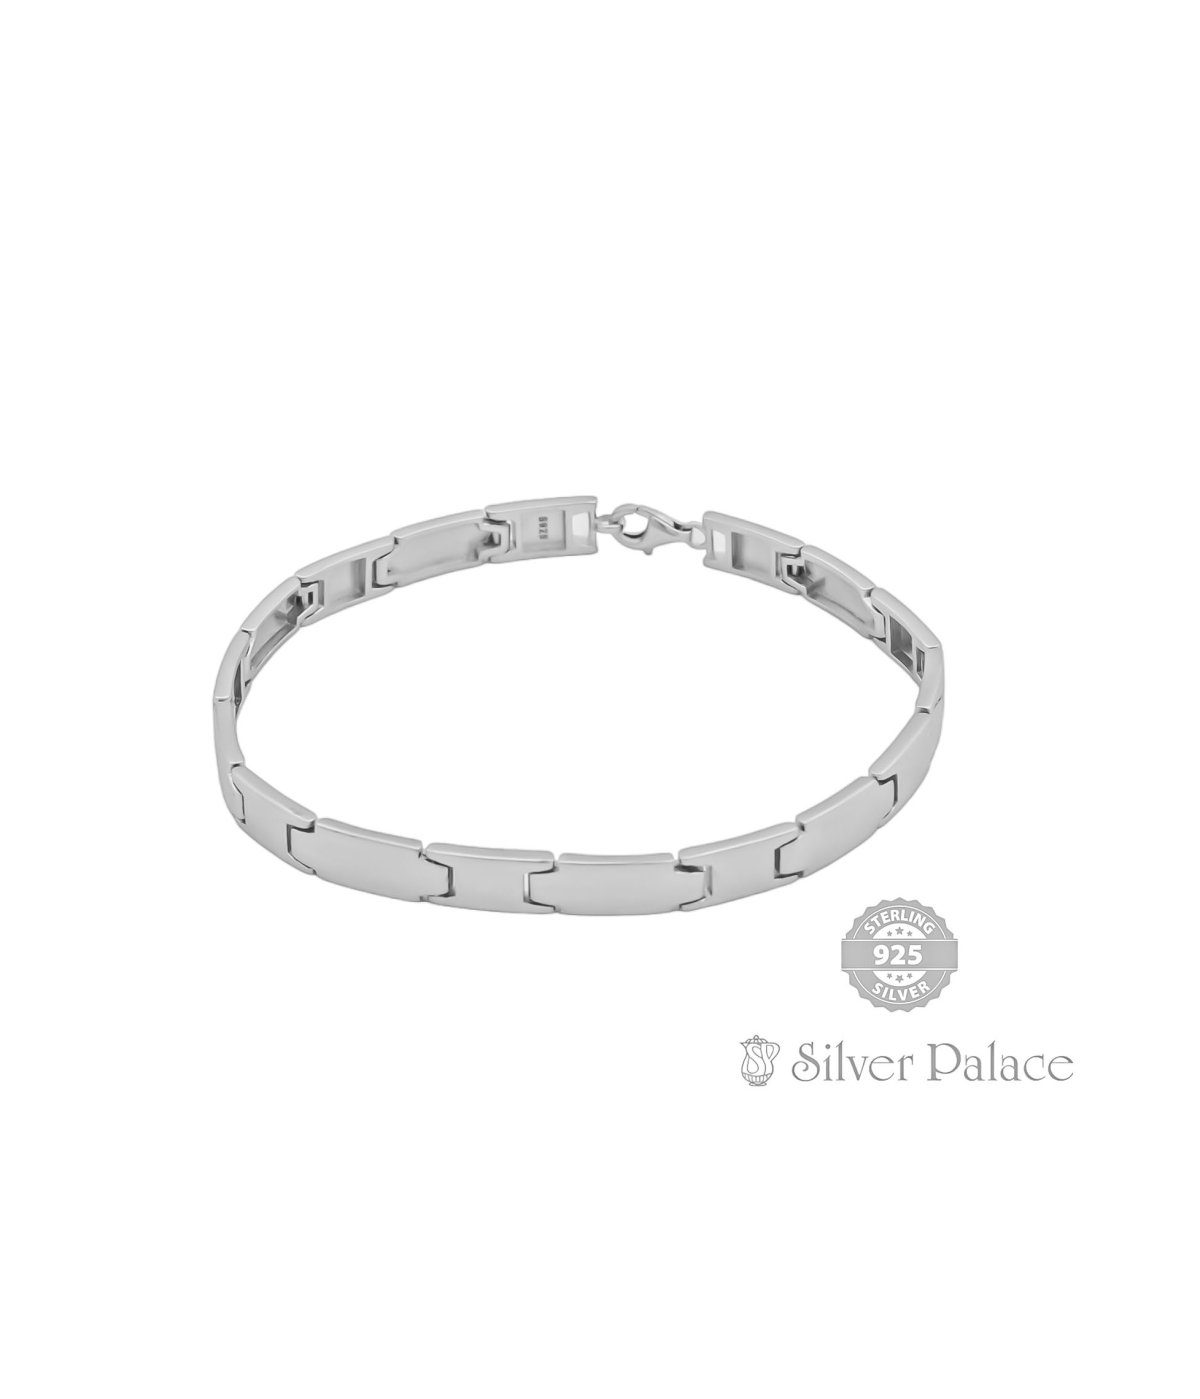 92.5 SILVER RHODIUM PLATED MENS BRACELET FOR DAILY WEAR 